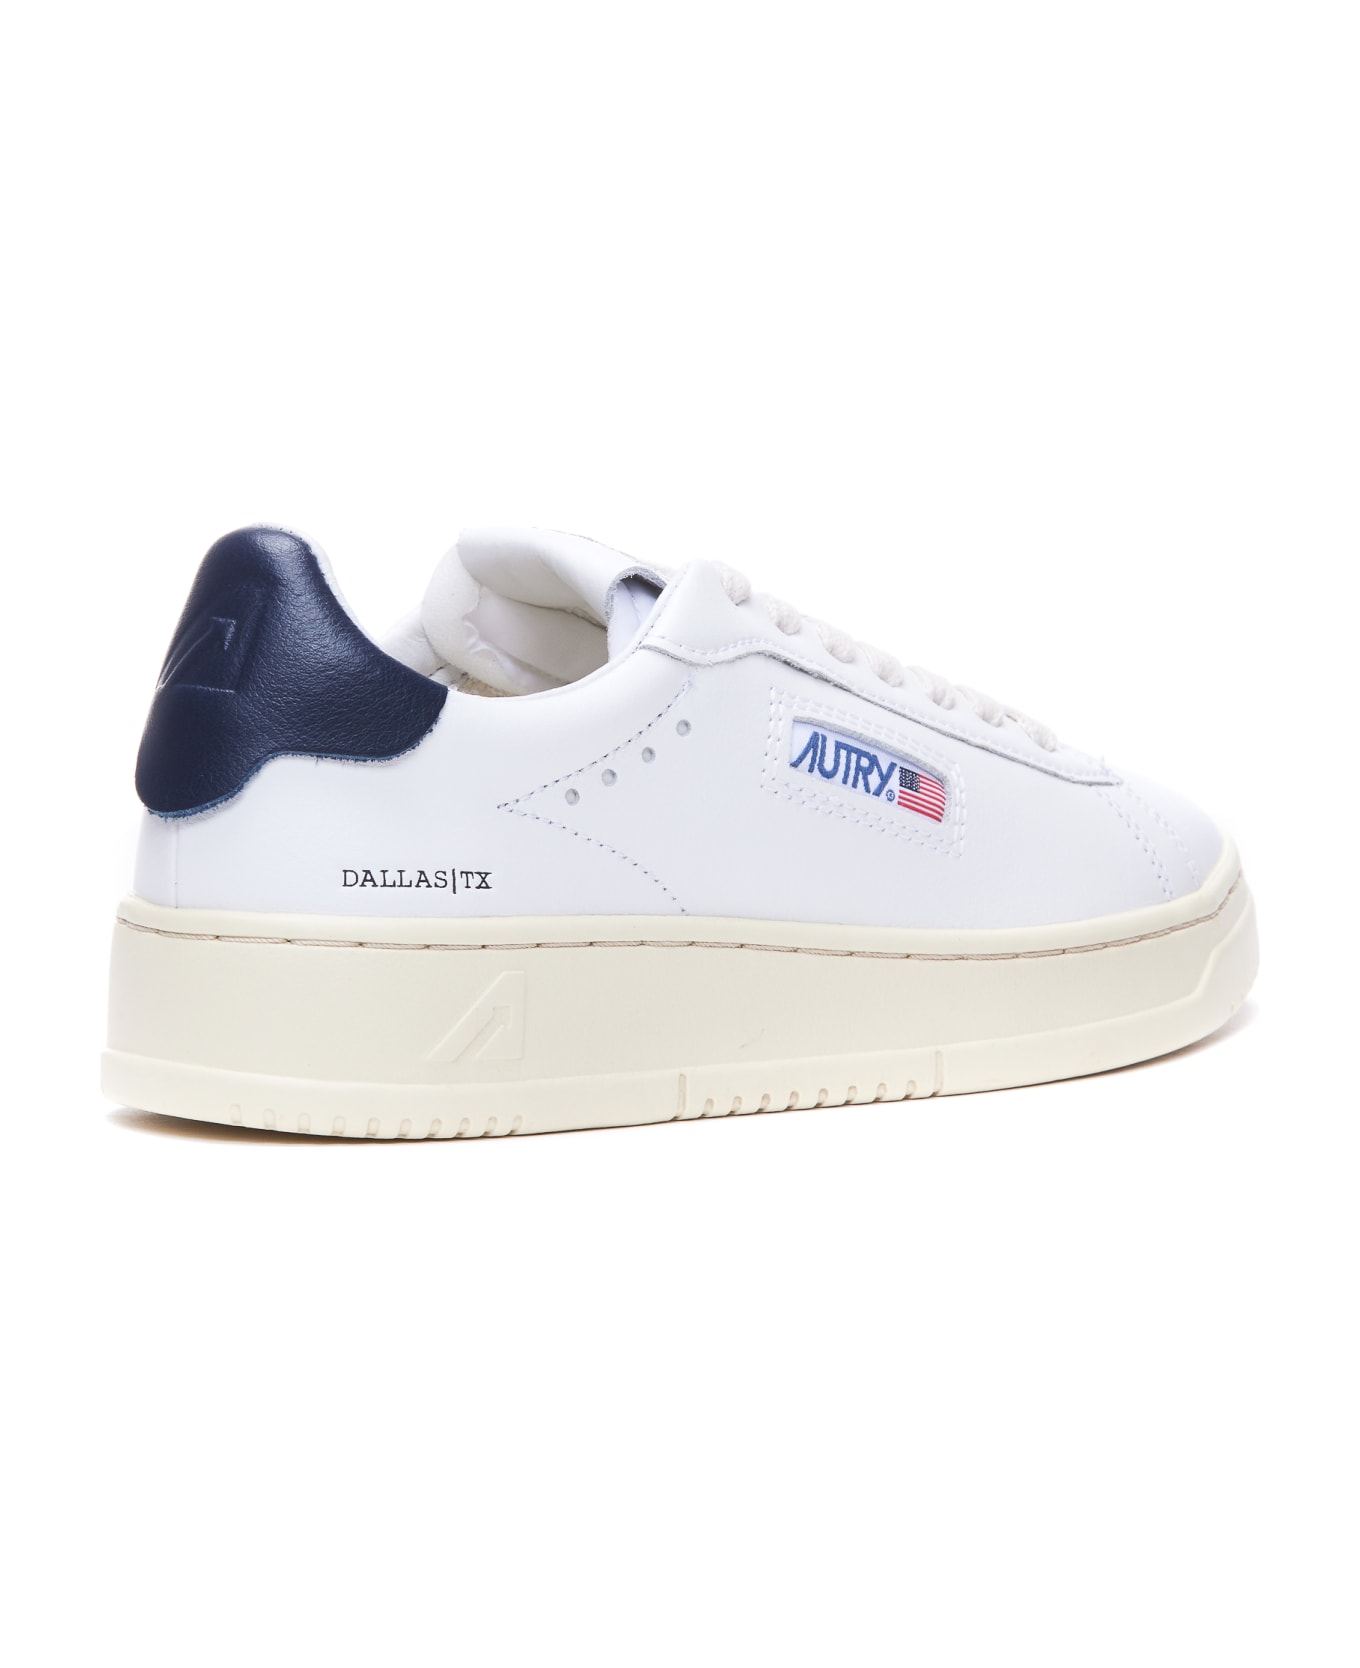 Autry Dallas Low Sneakers - NW05